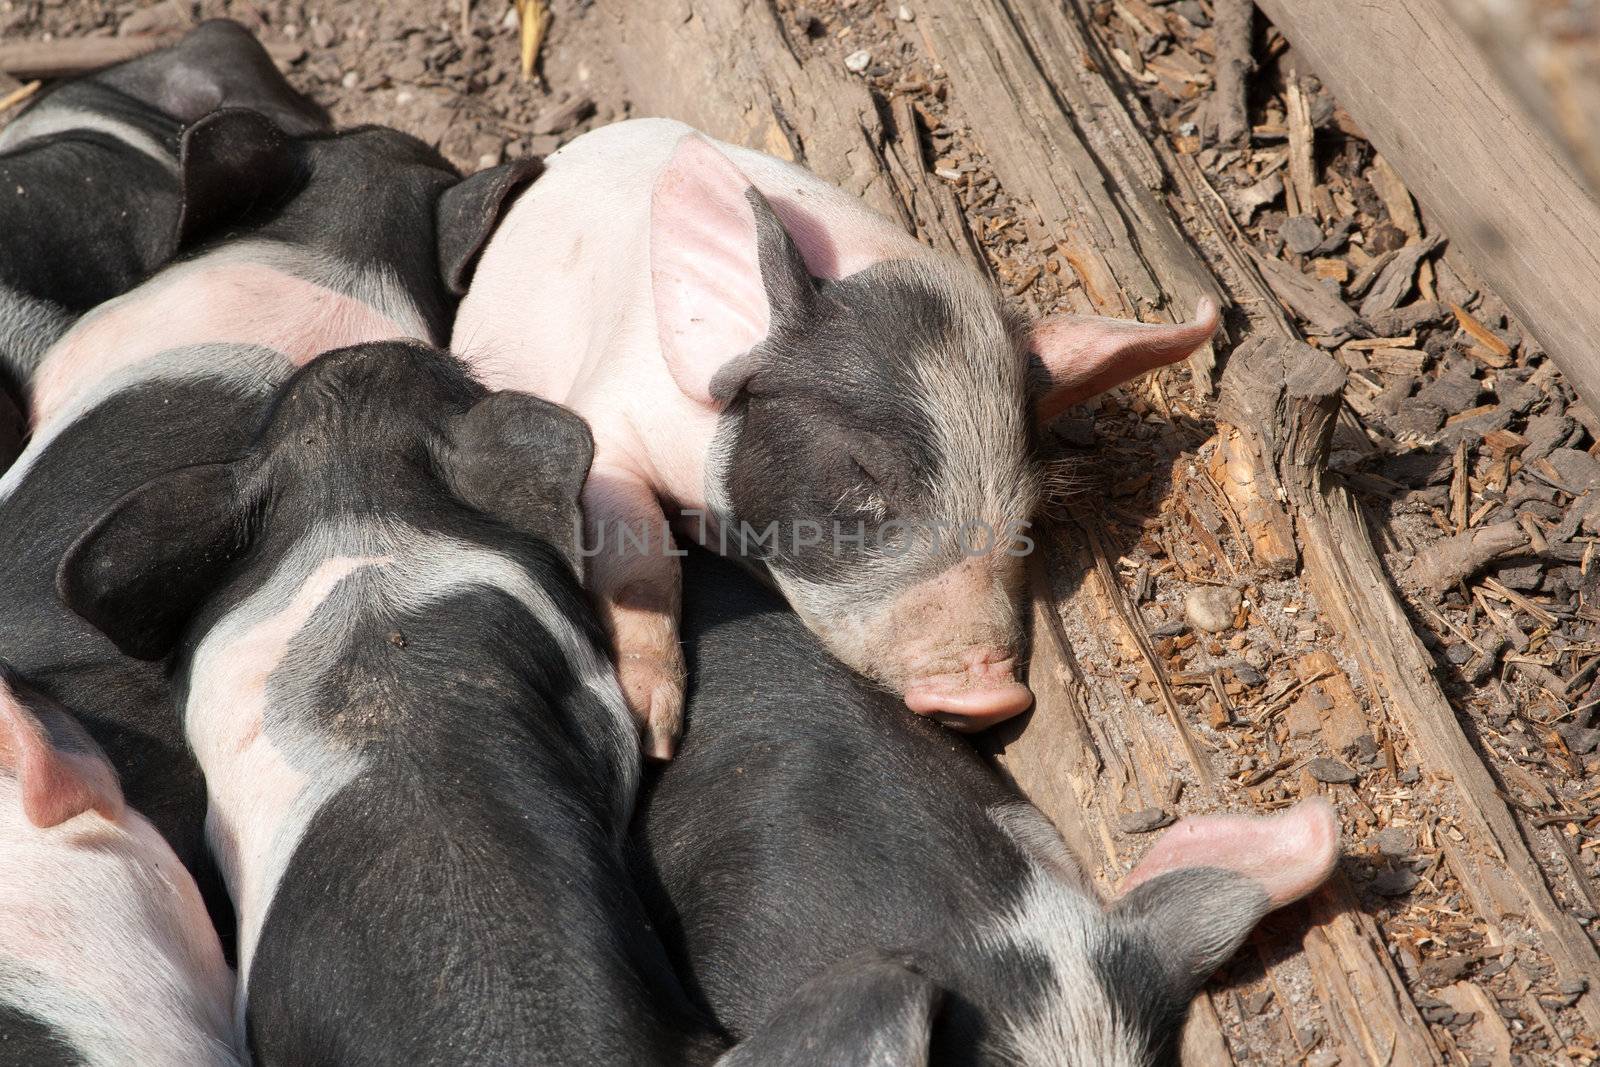 Piglets curled up against each other sleeping